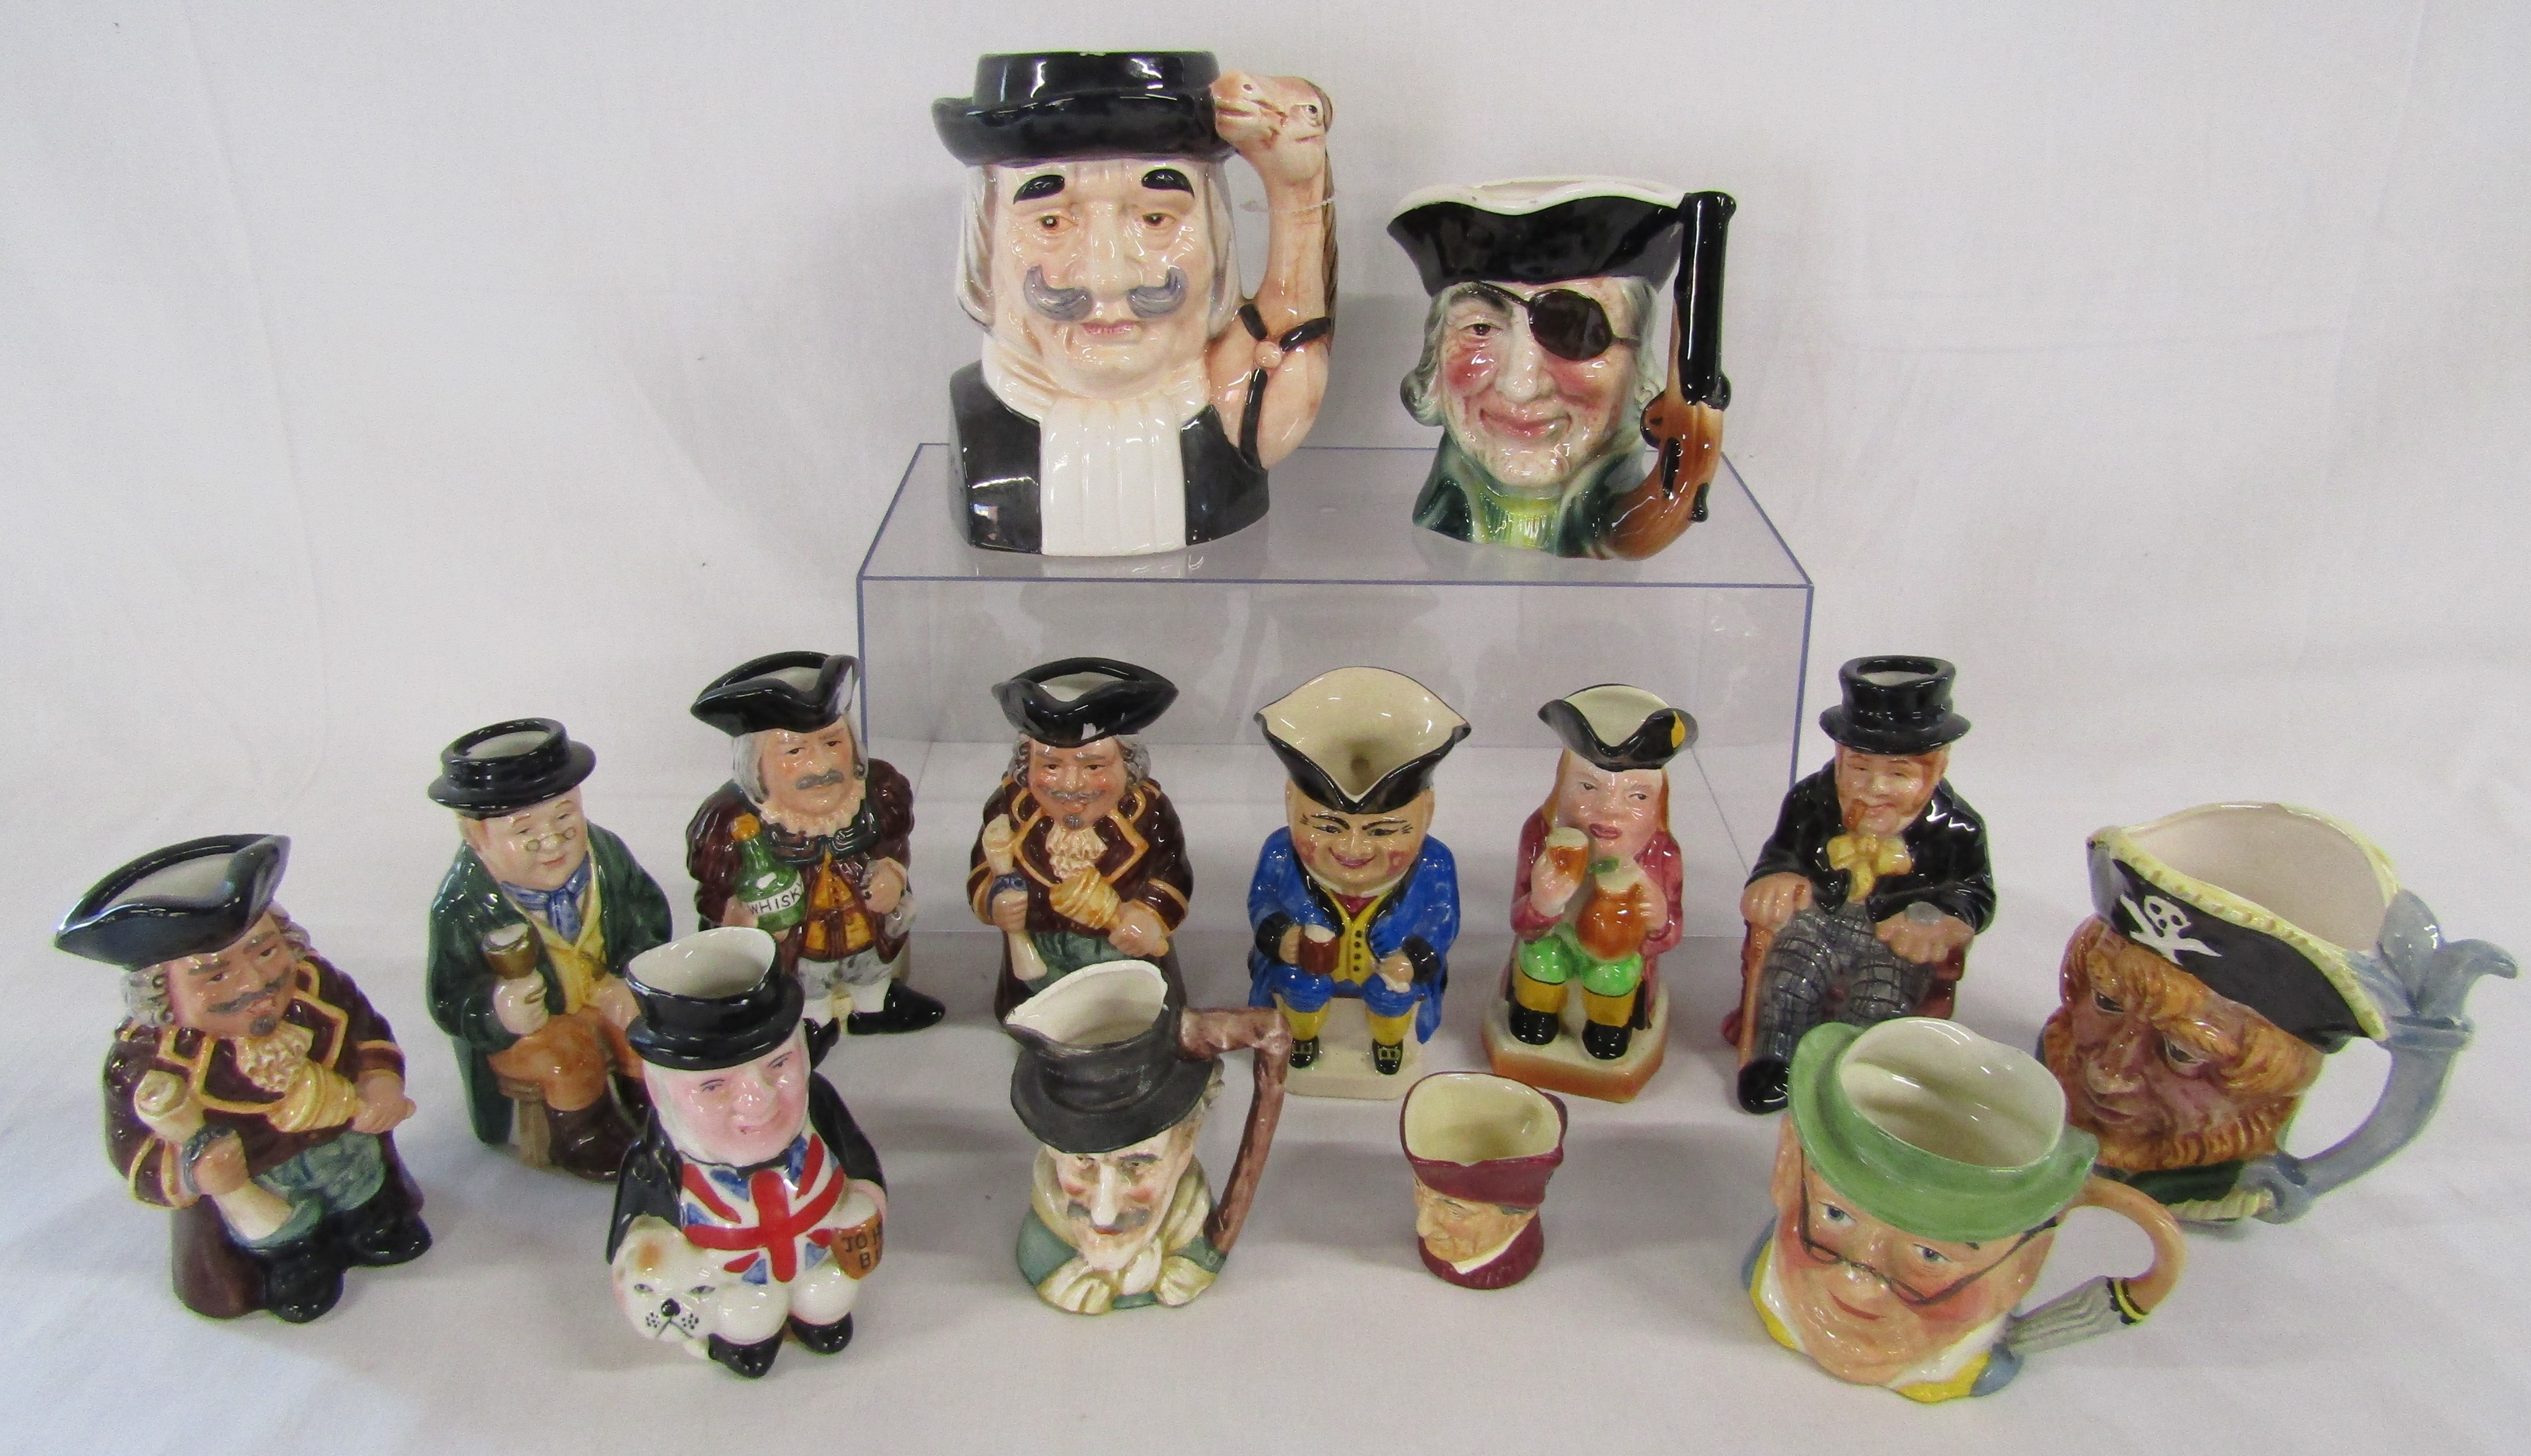 14 character & toby jugs includes town crier, Kelsbro Ware 'Mr Pickwick', Royal Doulton miniature,